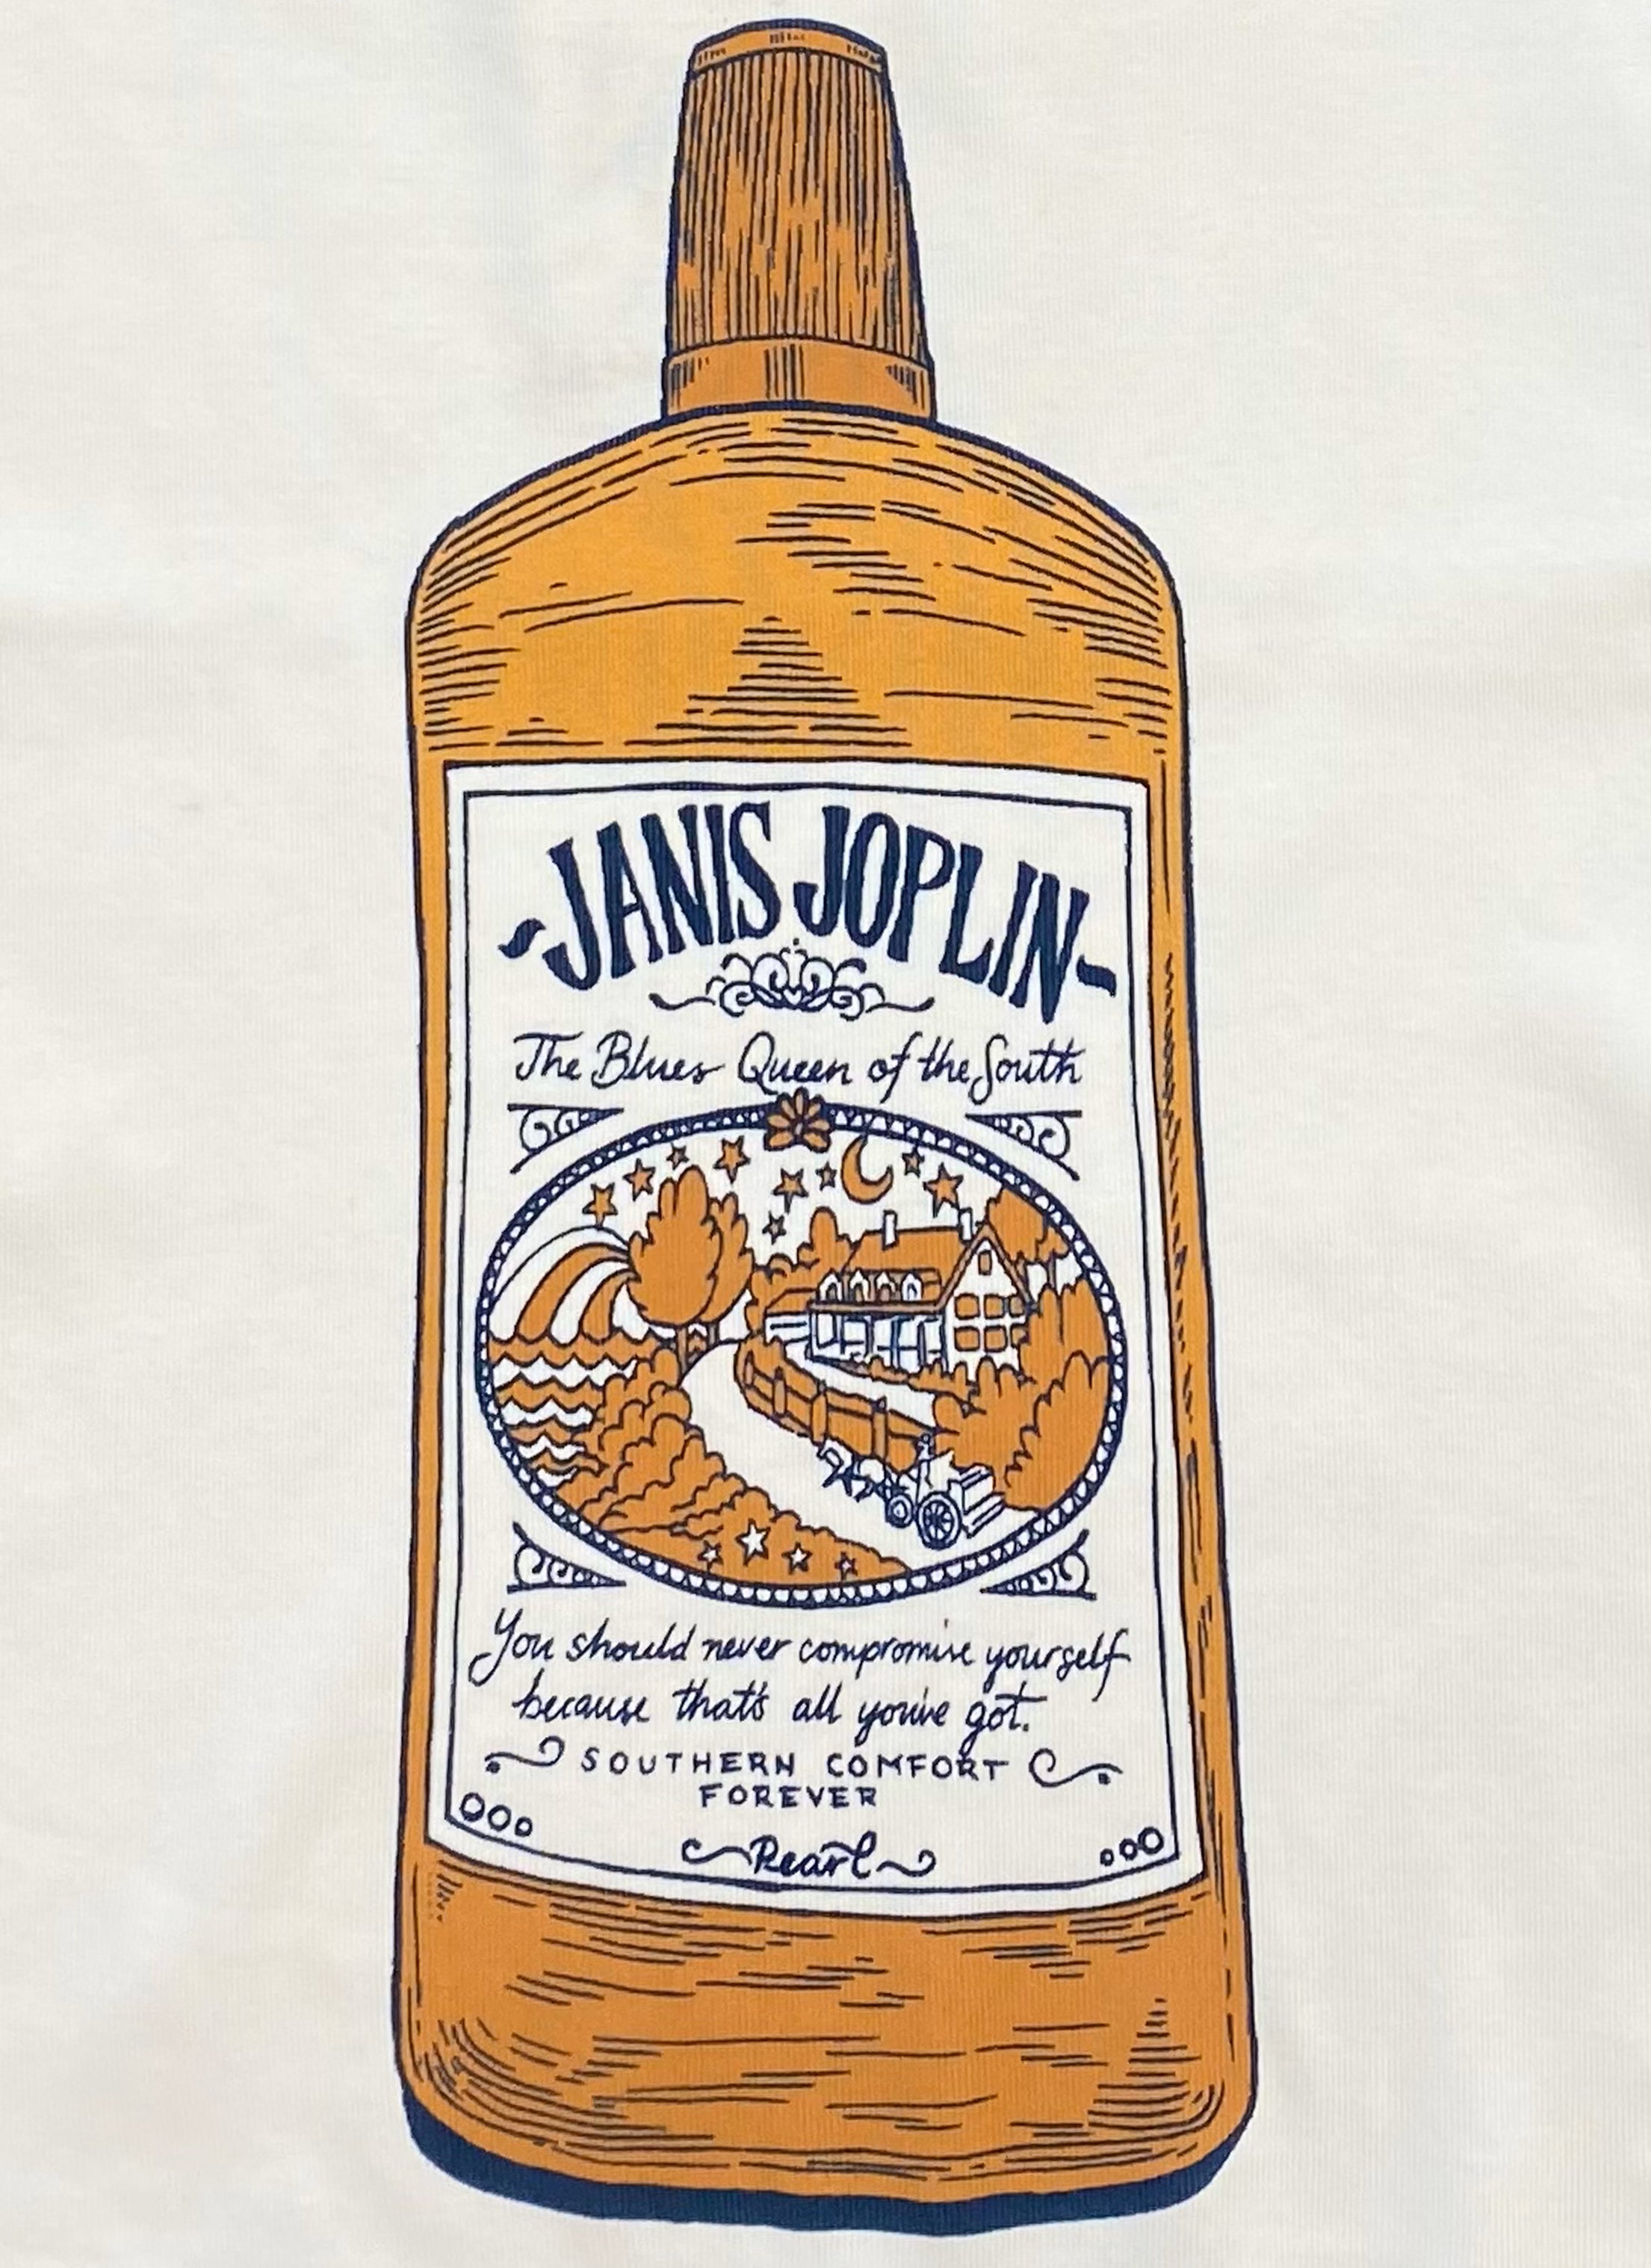 Janis Joplin The Blues Queen of the South Lace Tank